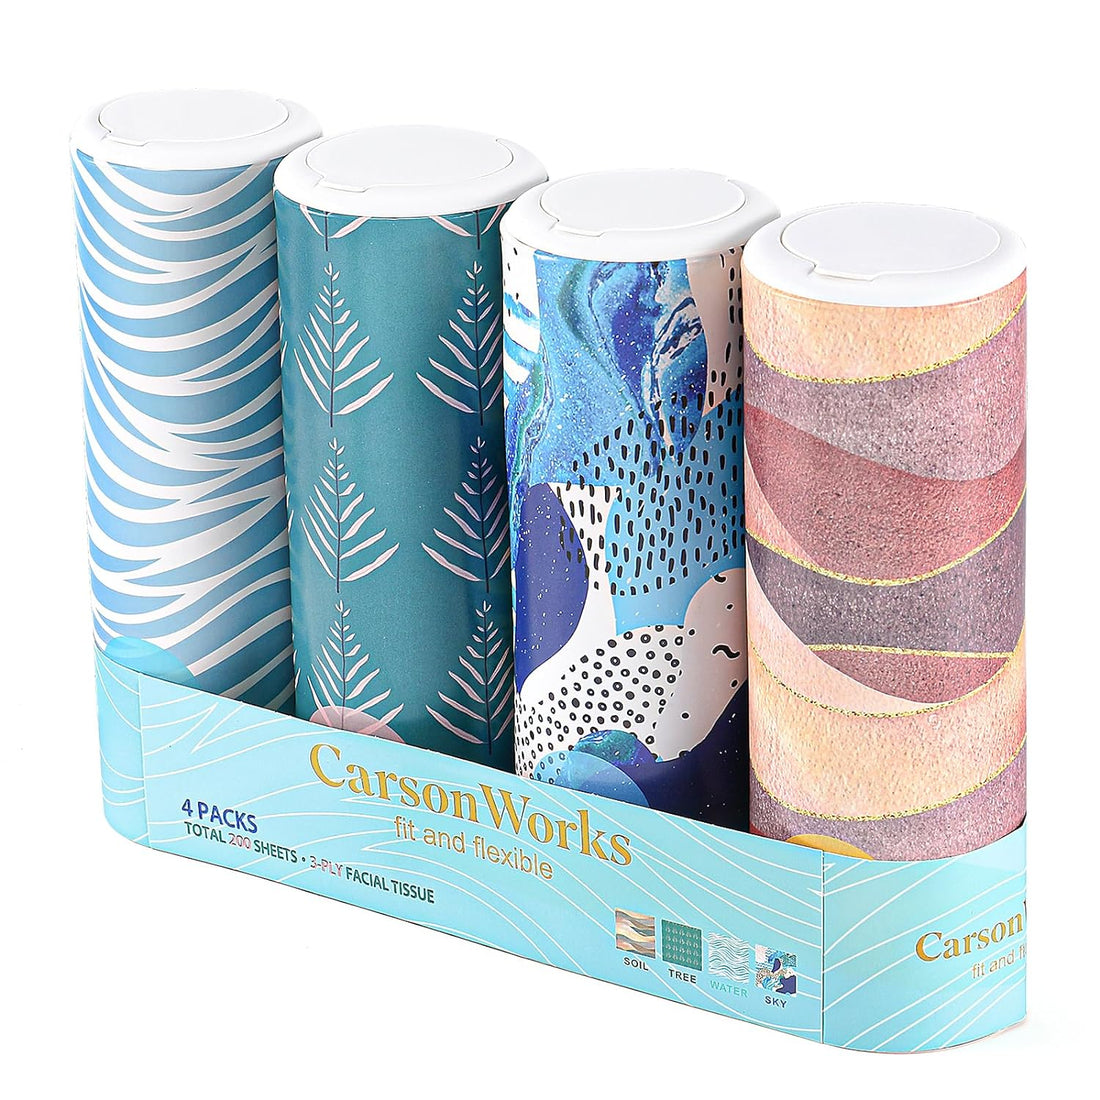 CarsonWorks Car Tissue Holder 4 Packs Round Box Tissues Cylinder Fit for Car Cup Holder, Home Small Tissue Dispenser with Refill Facial Tissues